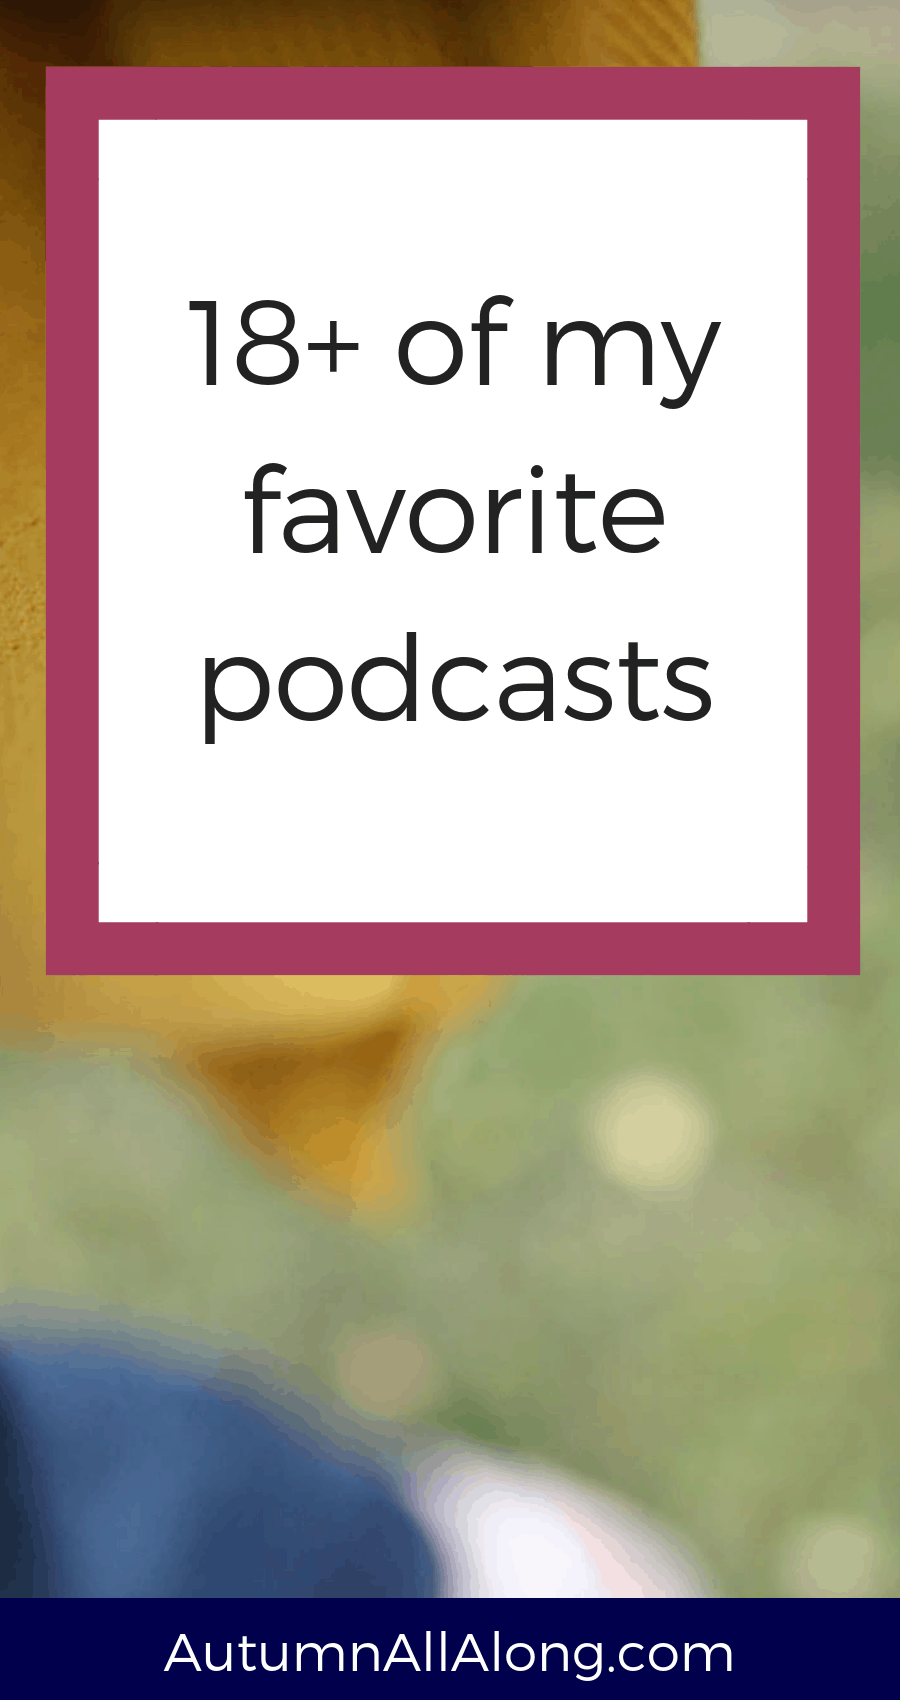 18+ of my favorite podcasts. Great podcasts if you'd like to learn something everyday. | via Autumn All Along